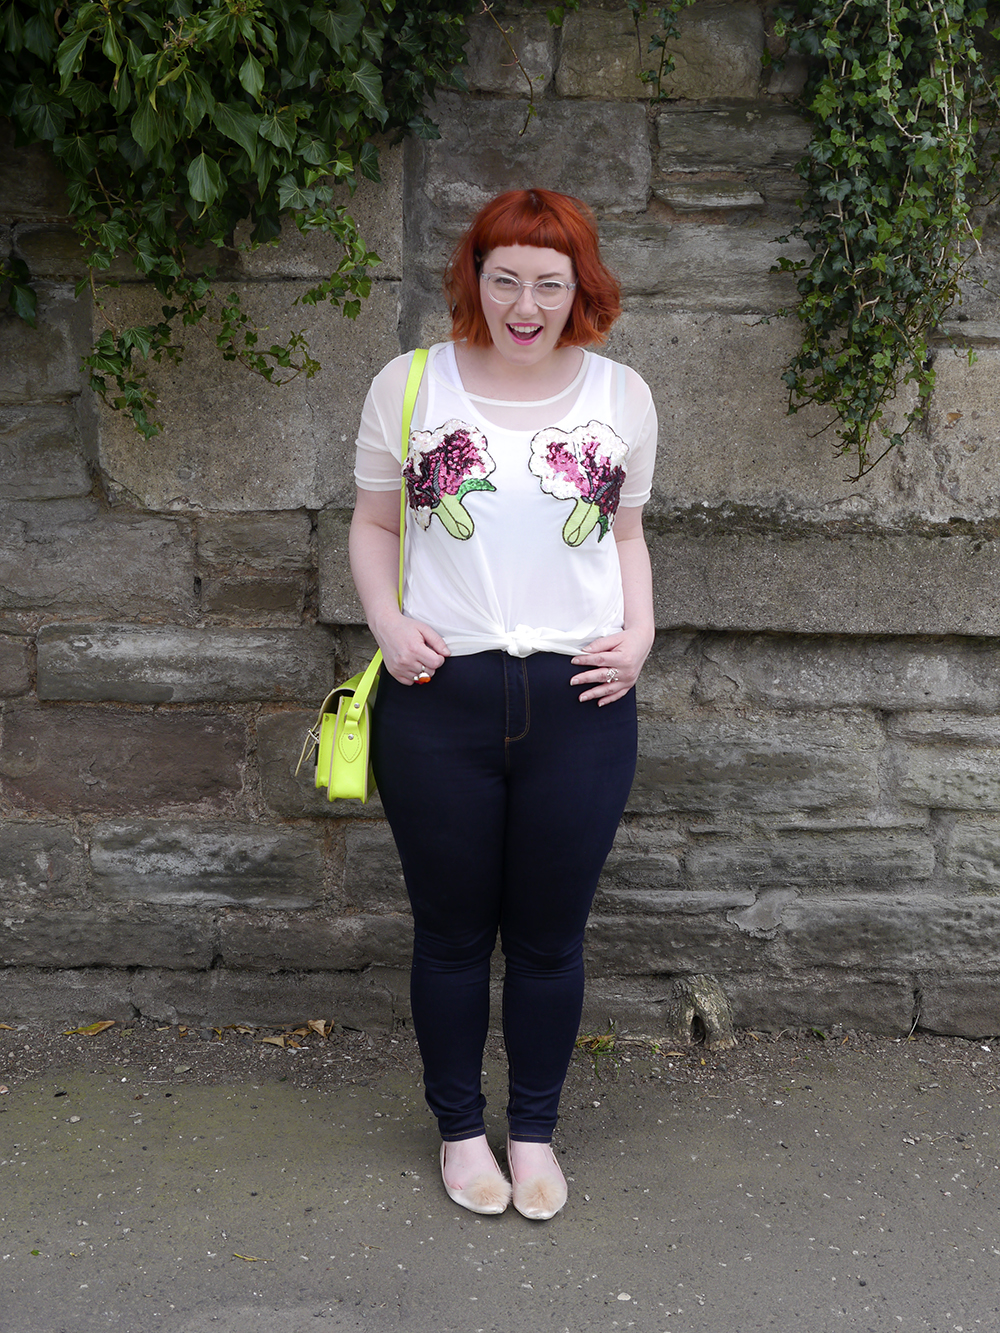 styled by Helen, Scottish blogger, Dundee blogger, red head, ginger hair, short ginger hair, Iolla glasses, #seewithiolla, Never Monday, day time sequins, sequin top, casual sequins, Yoshi satchel, neon yellow satchel, denim jean, pom pom shoes, pom pom flat shoes, pink pom pom shoes